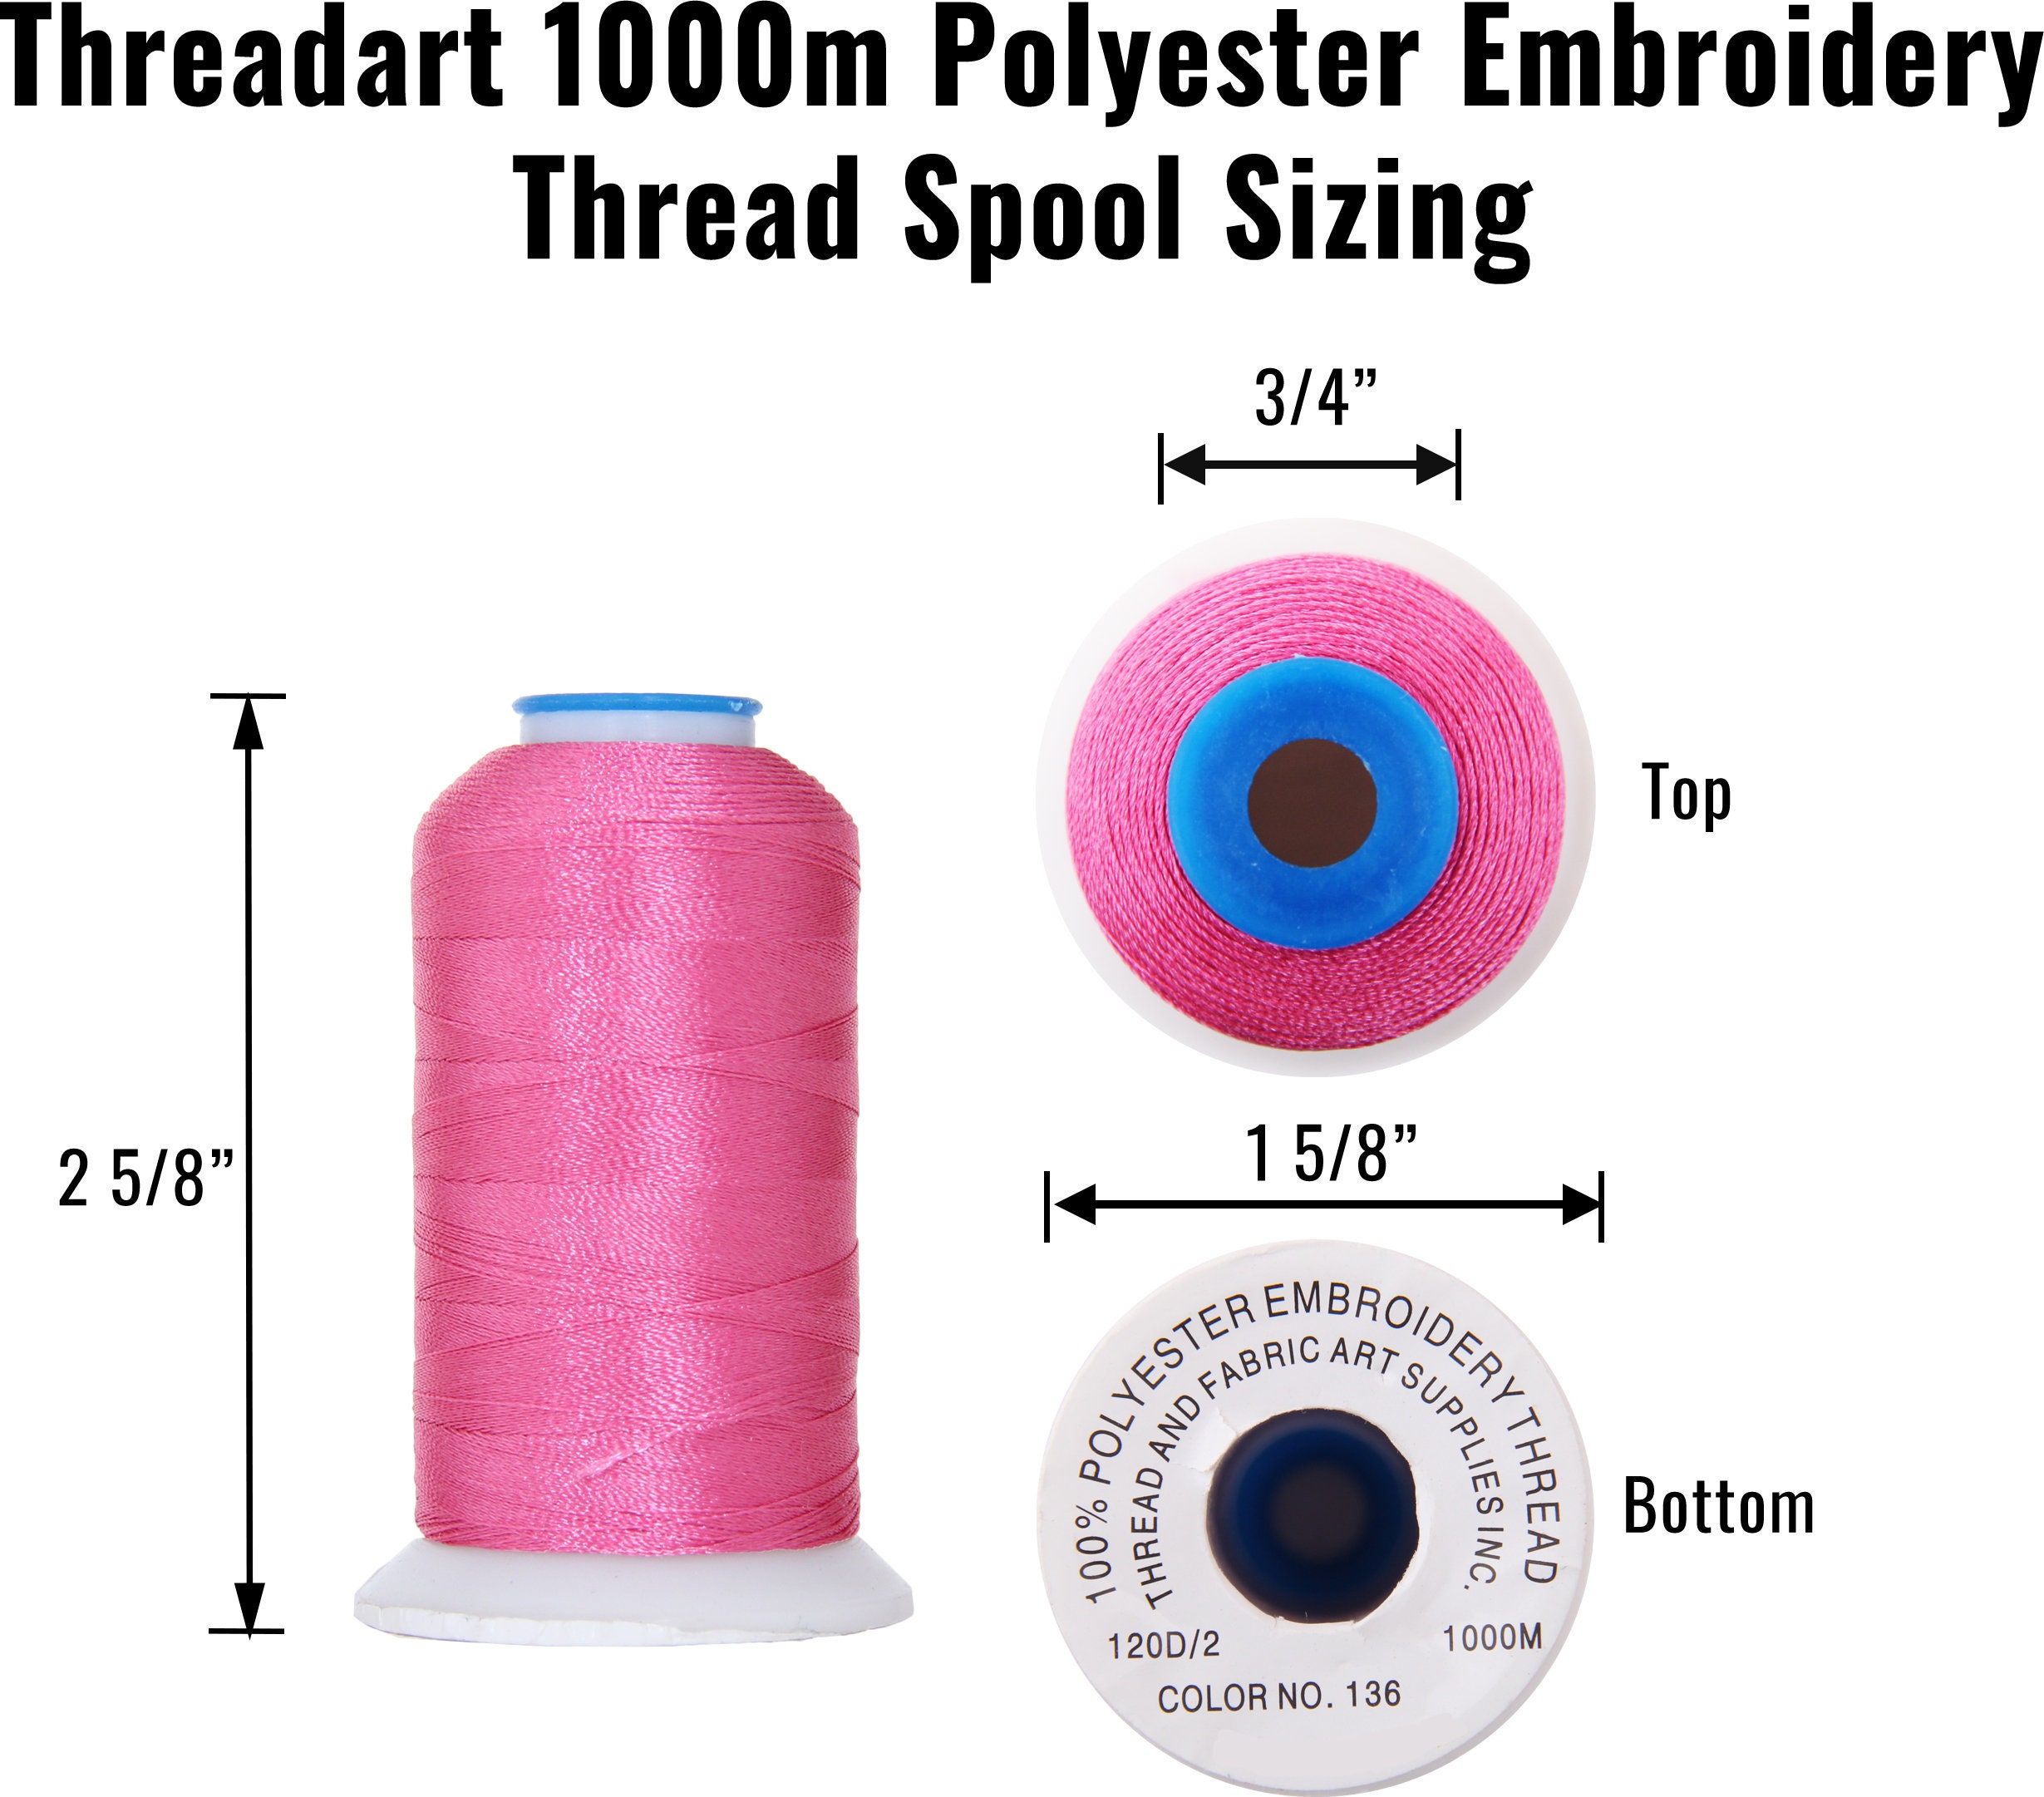 Embroidery Huge Spool Machine Thread-5000 Meters Simthread 120D/2 Polyester  40wt